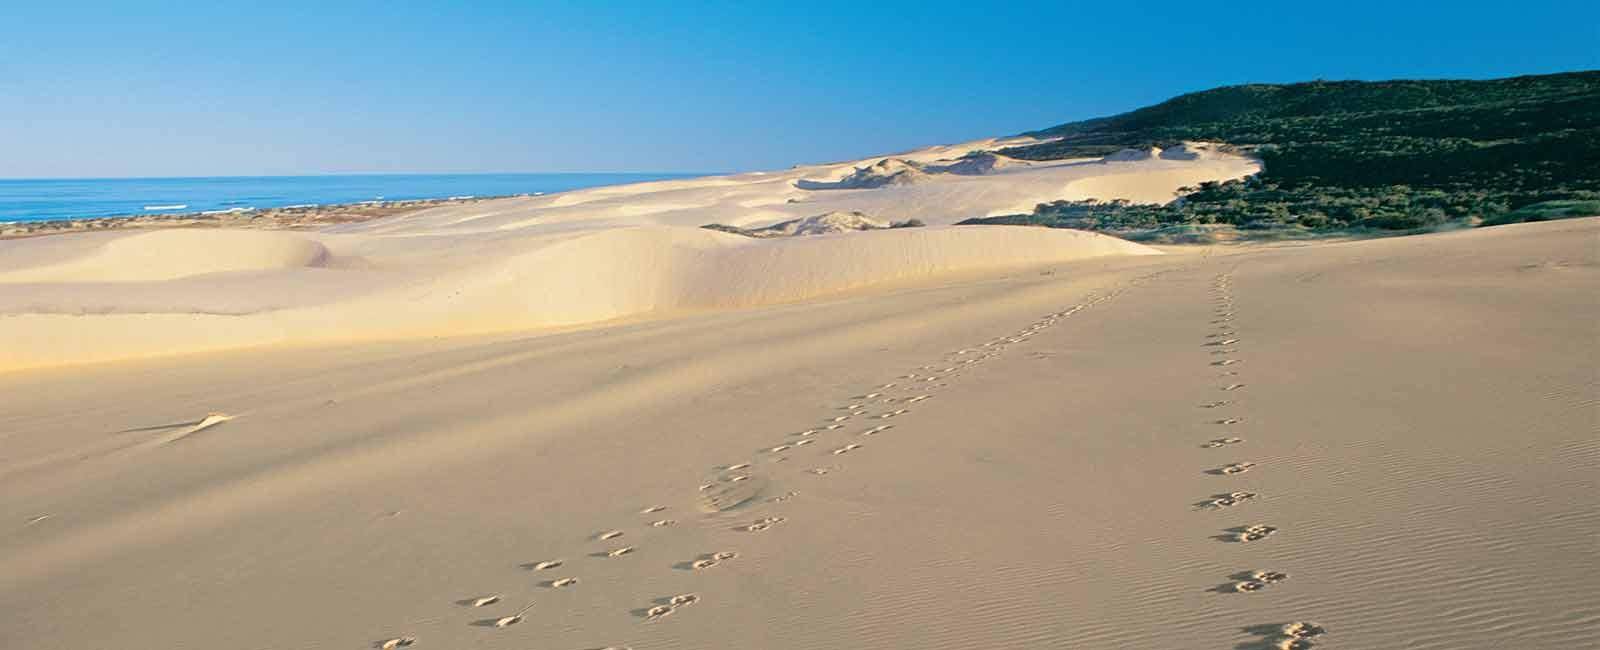 Leave only footprints